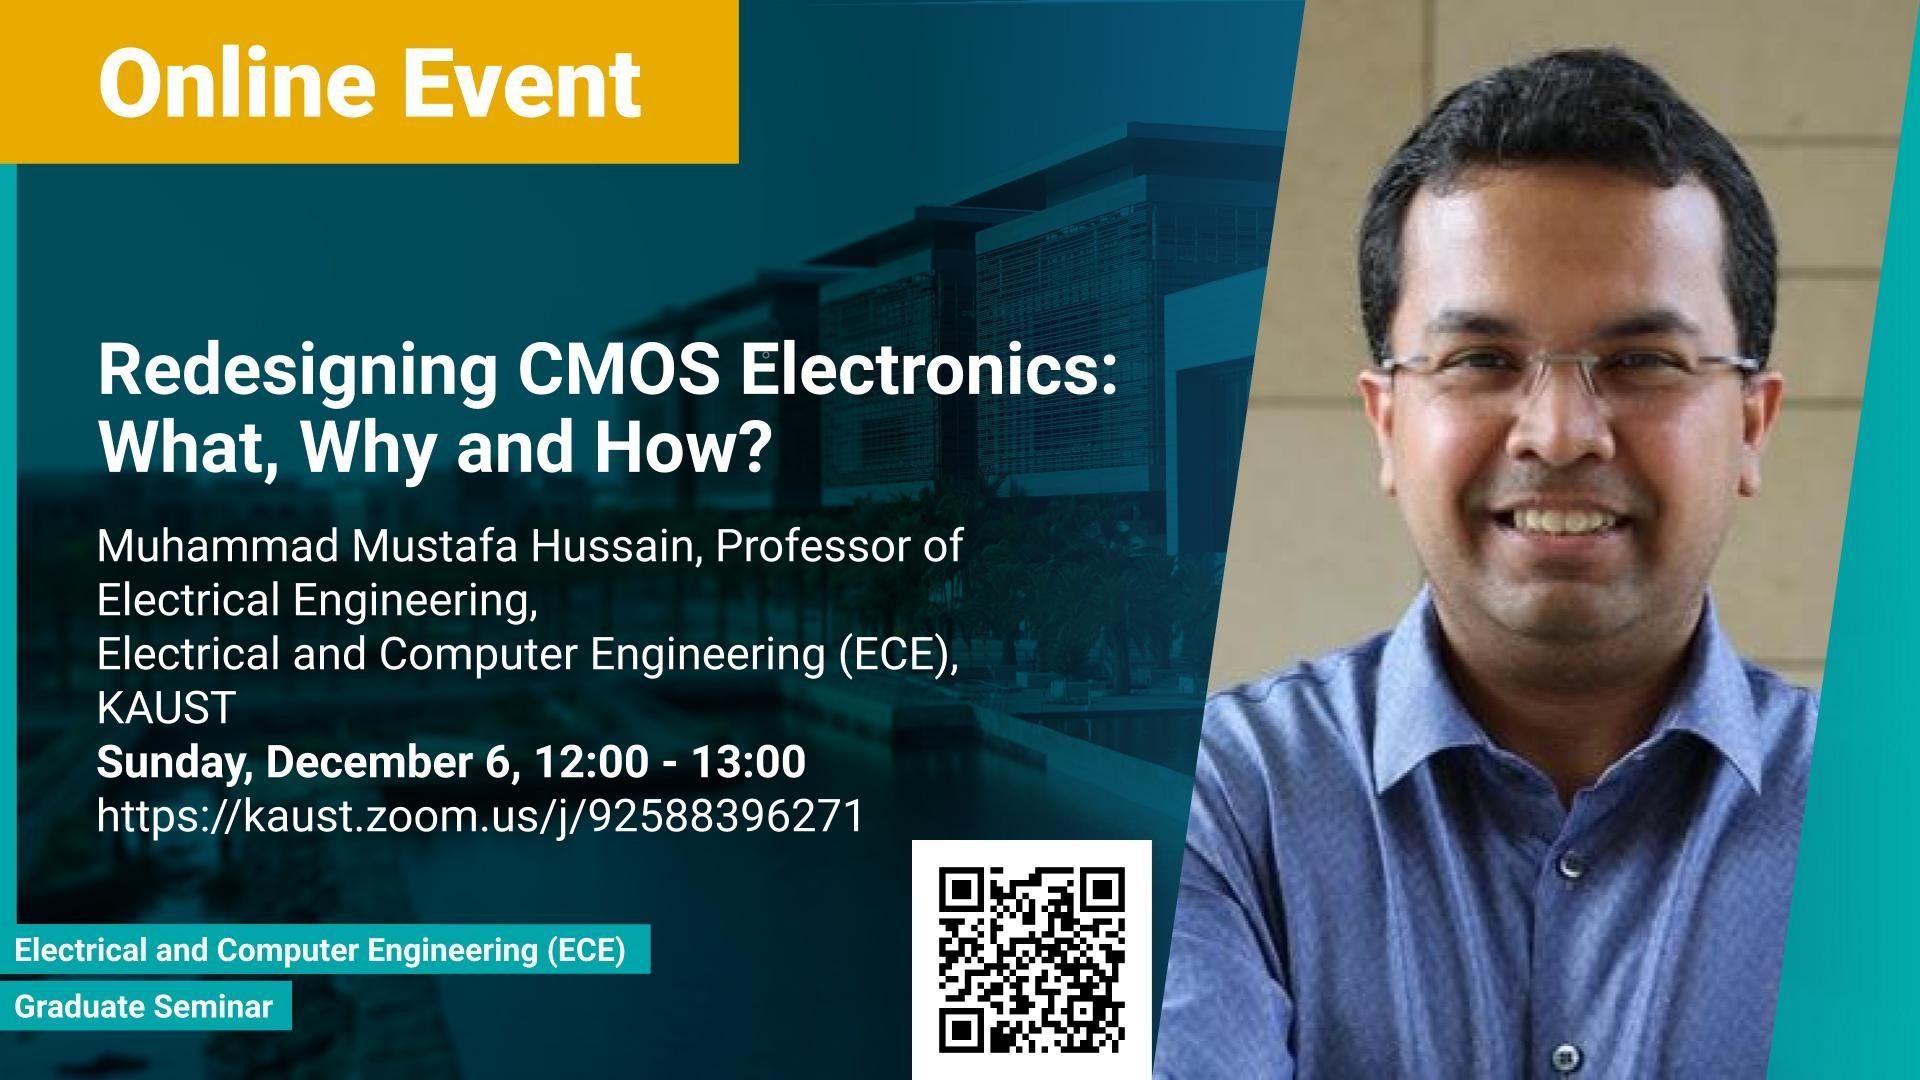 KAUST-CEMSE-ECE-Graduate-seminar-Redesigning-CMOS-Electronics-What-Why-and-How-Muhammad-Mustafa-Hussain.jpg